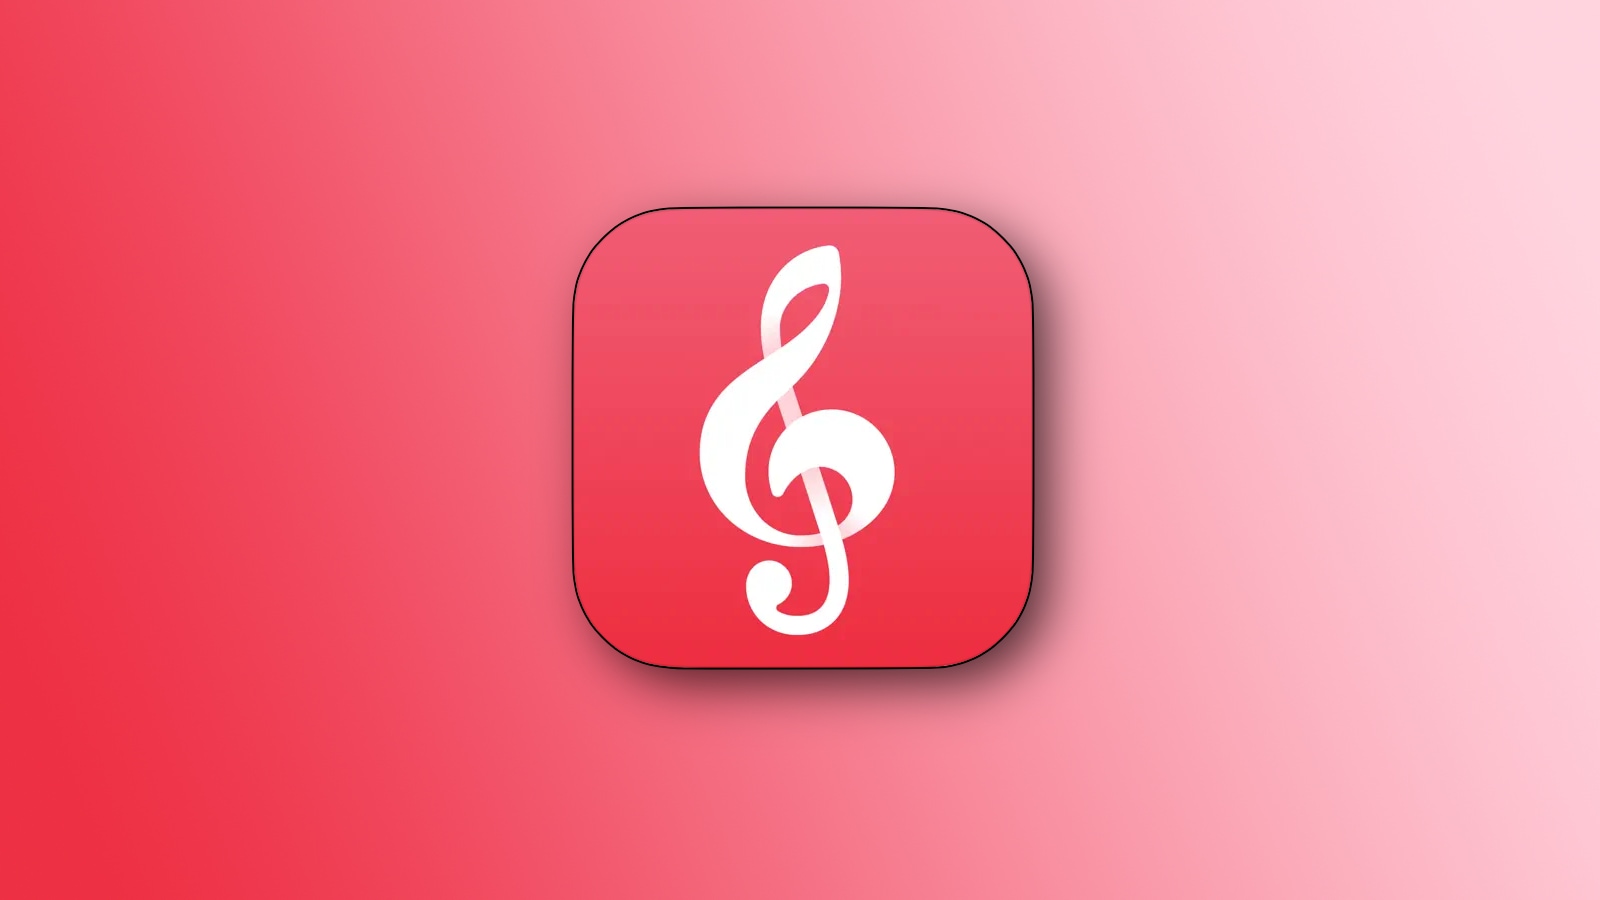 The Apple Music Classical app icon set against a red gradient background